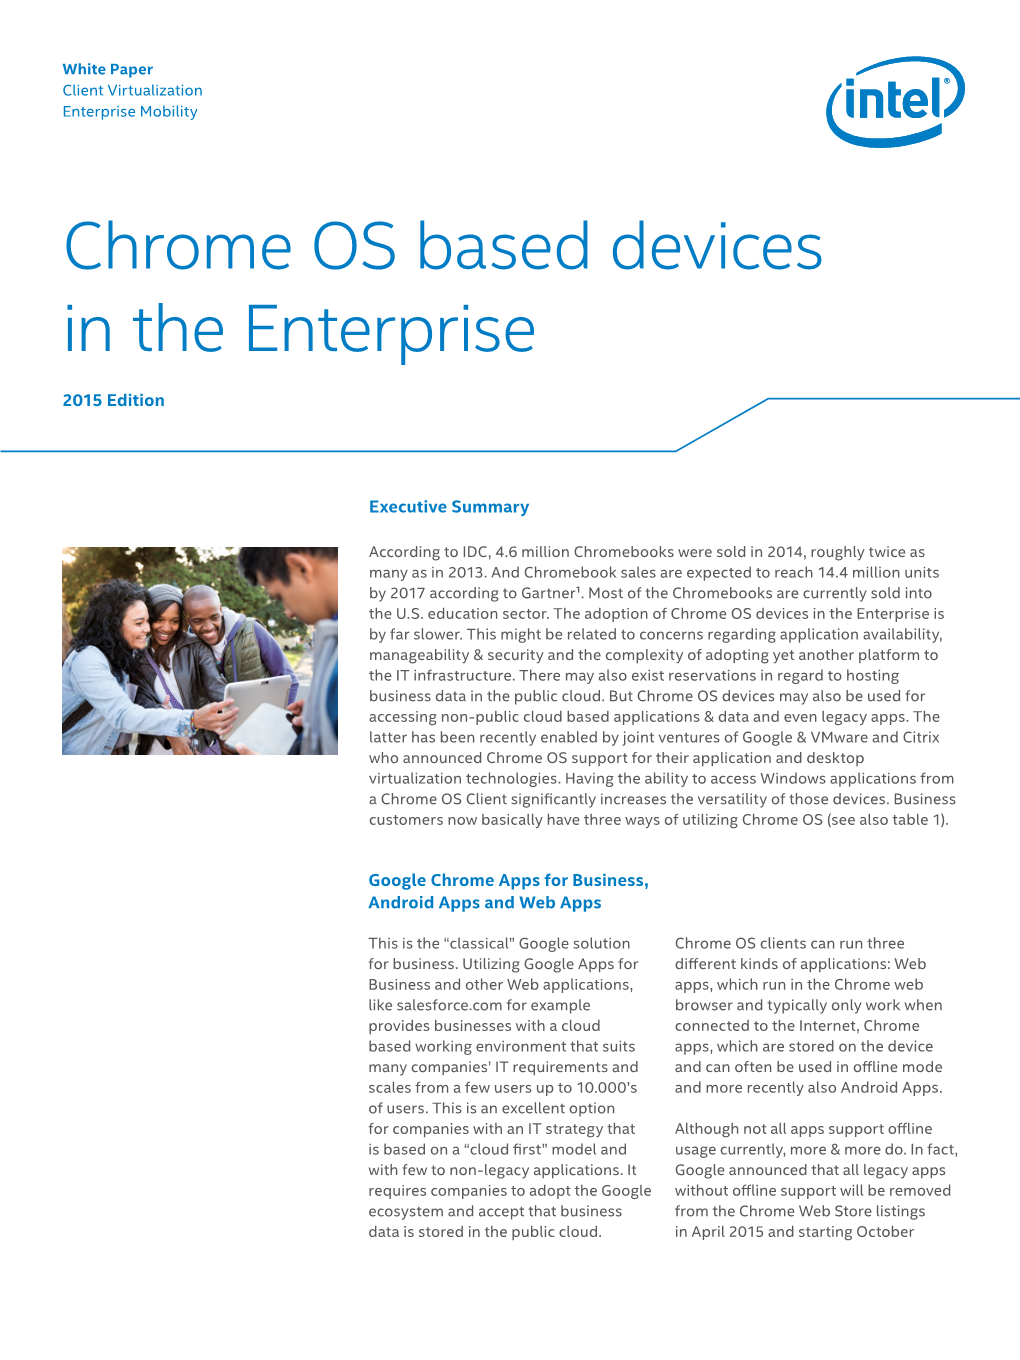 Chrome OS Based Devices in the Enterprise